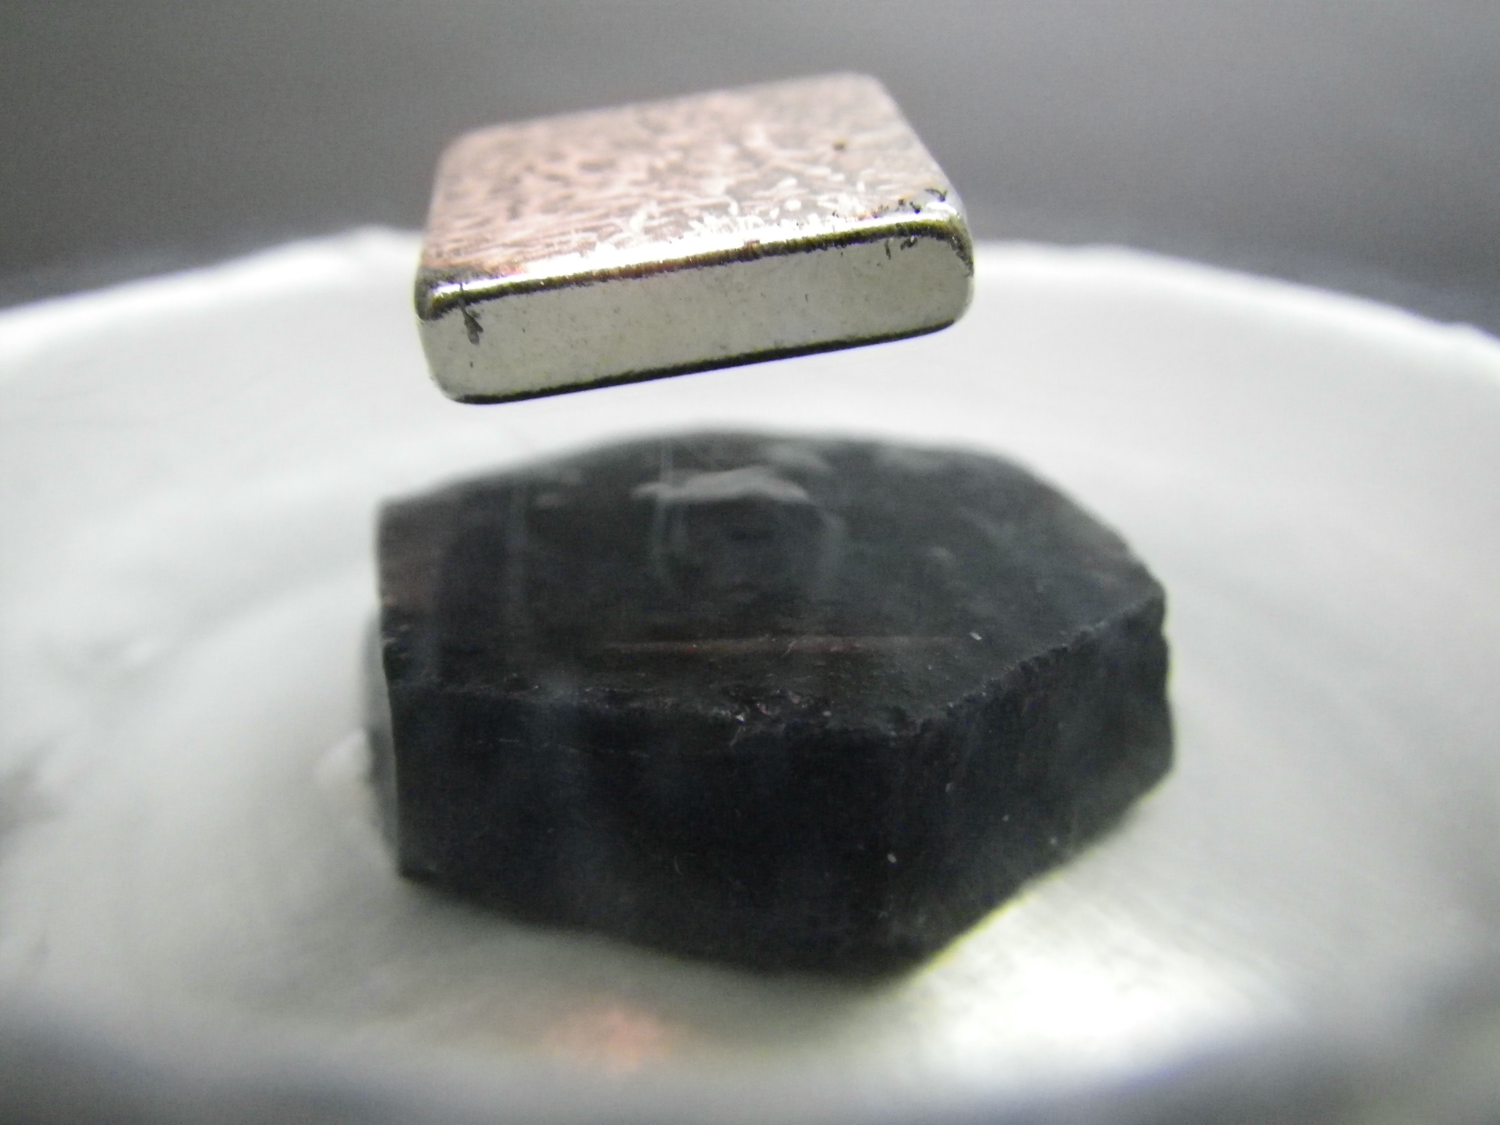 a square magnet levitating over a black chunck of supeconductive material sitting in a dish of liquid nitrogen